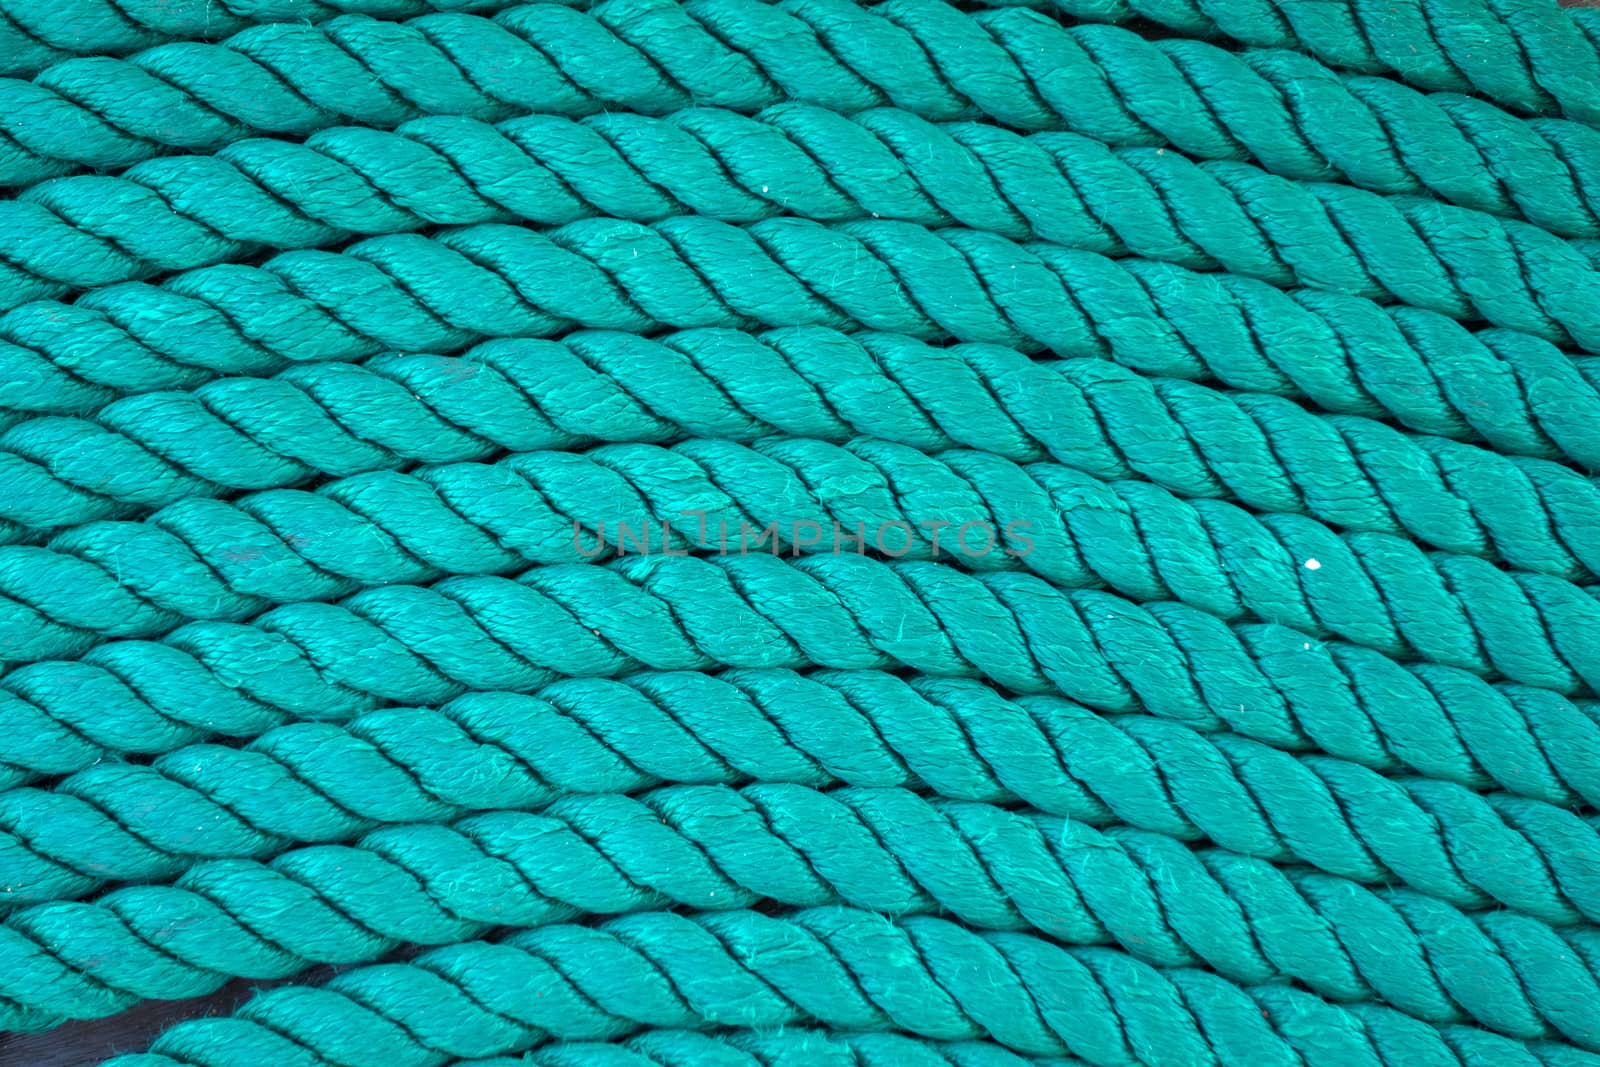 Thick rope by Portokalis